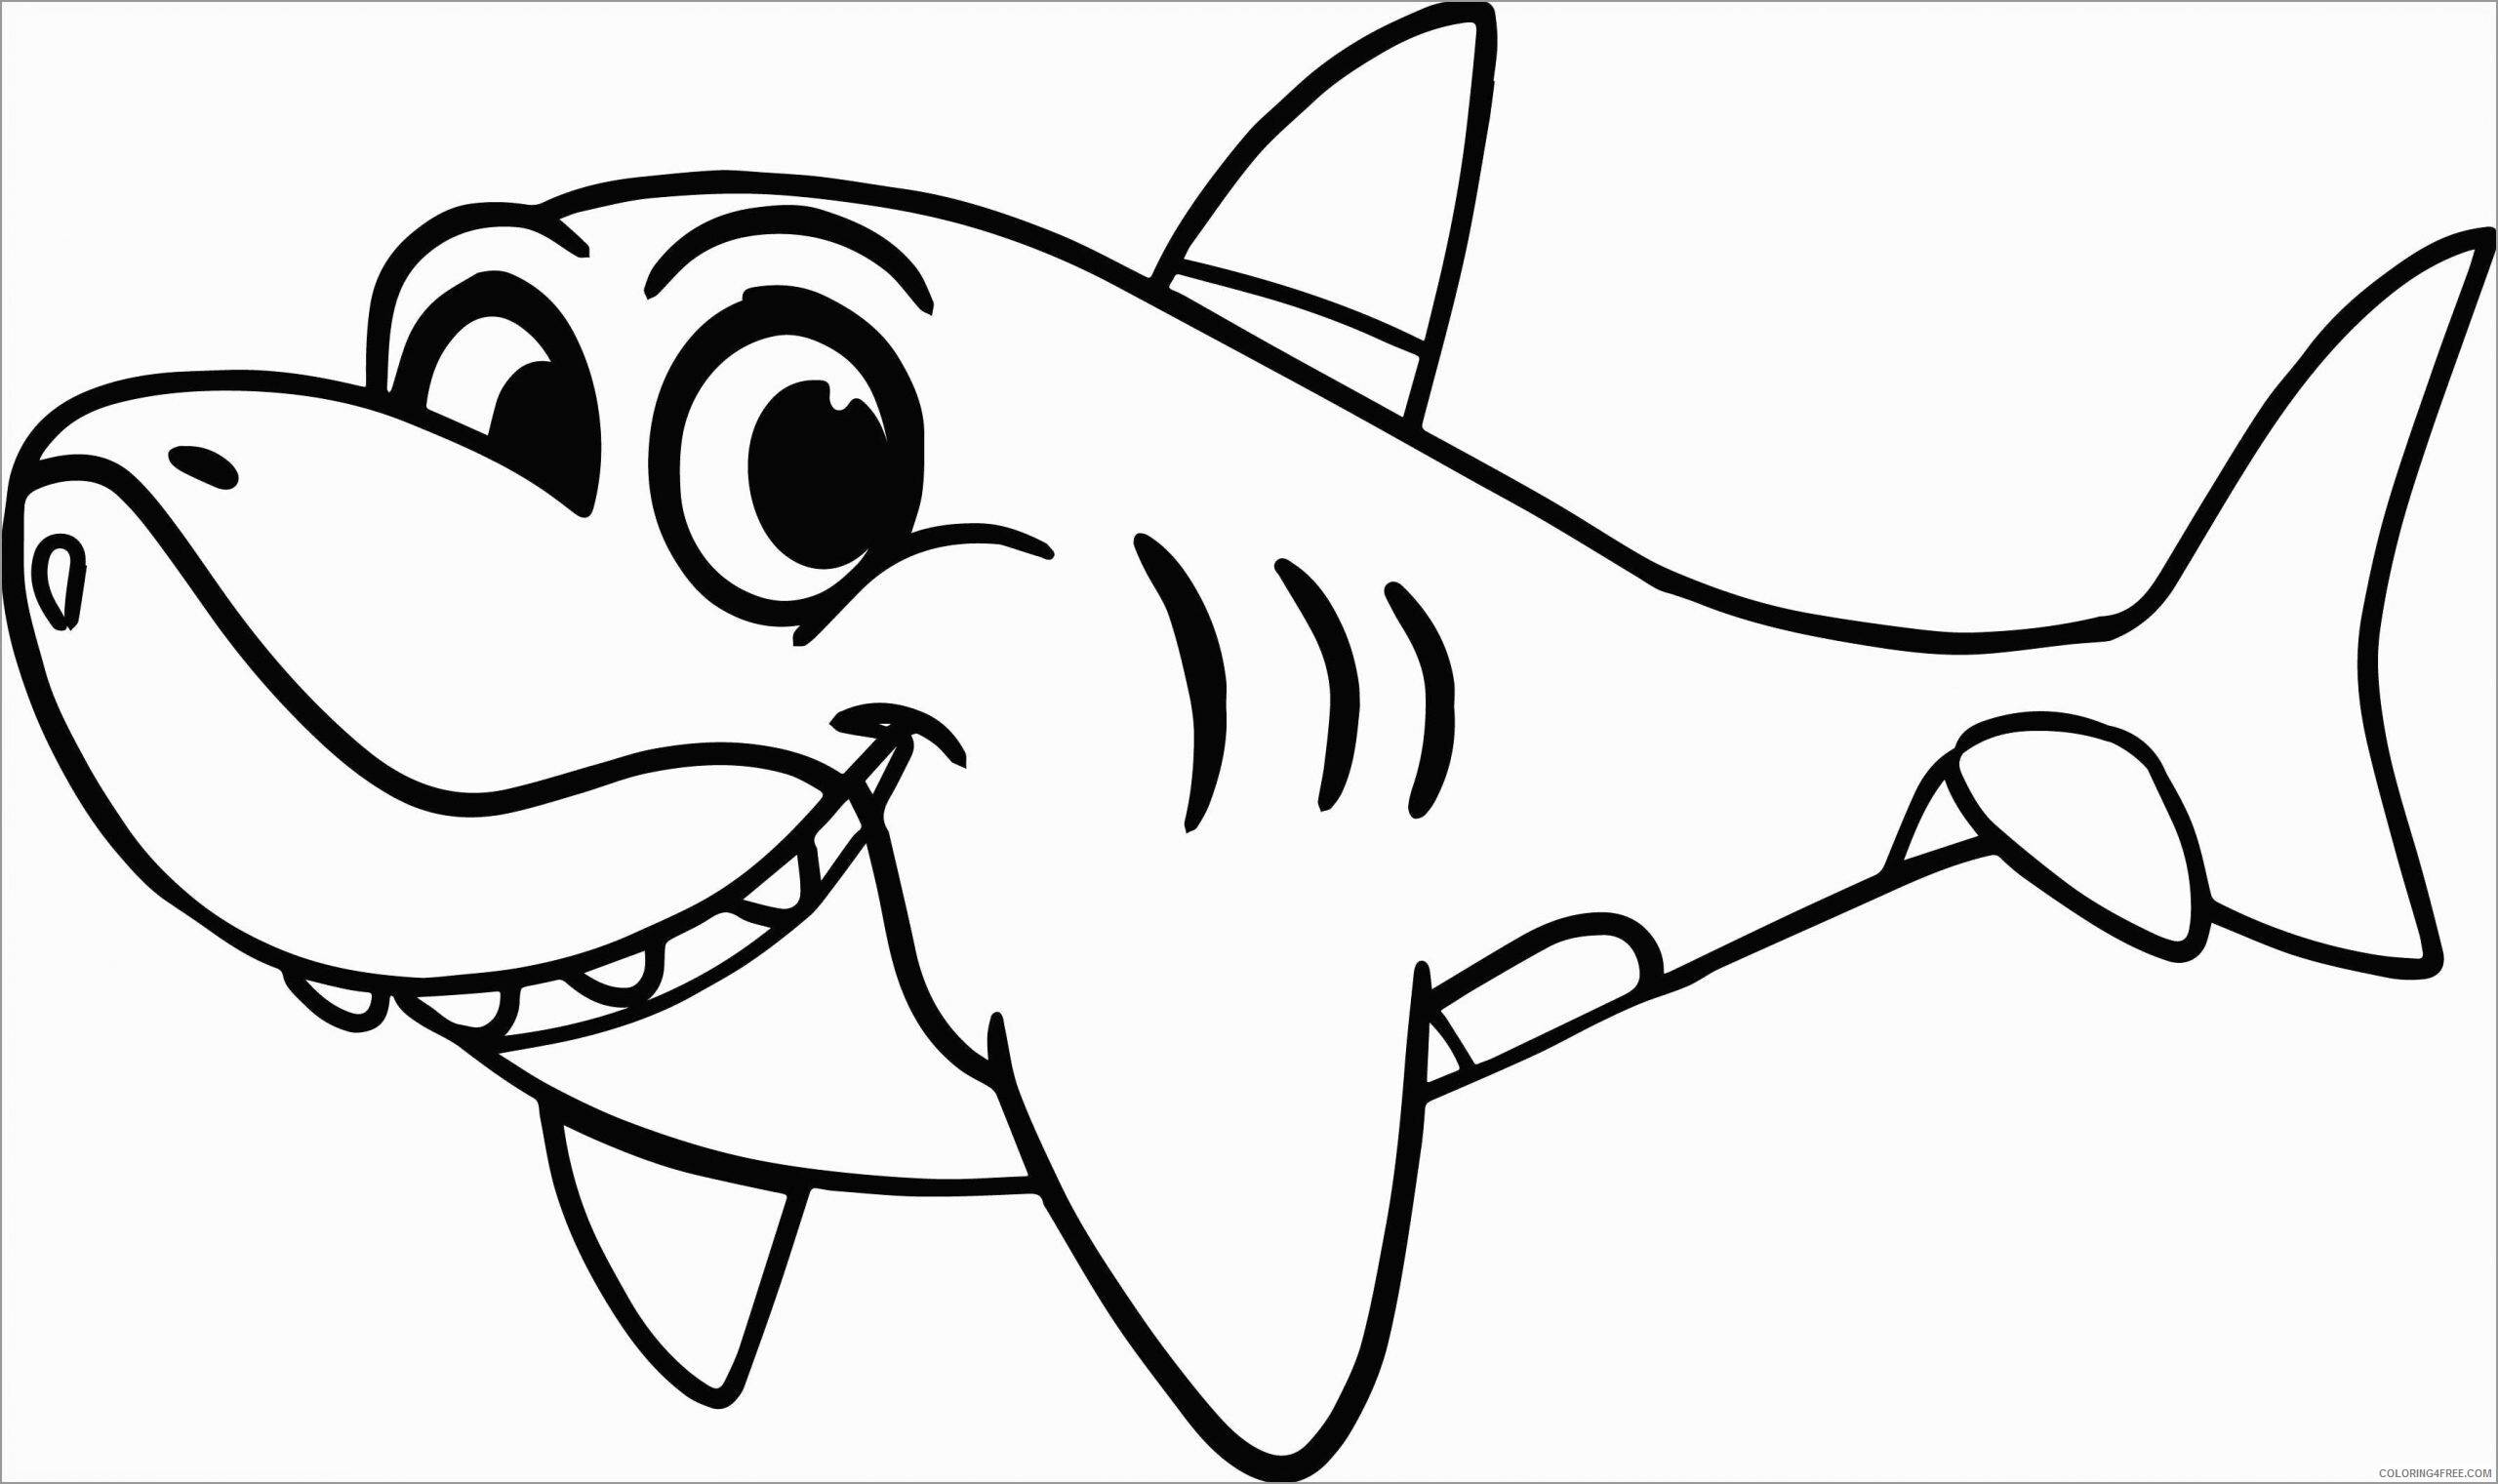 Sharks Coloring Pages Animal Printable Sheets cartoon shark for kids 2021 4444 Coloring4free